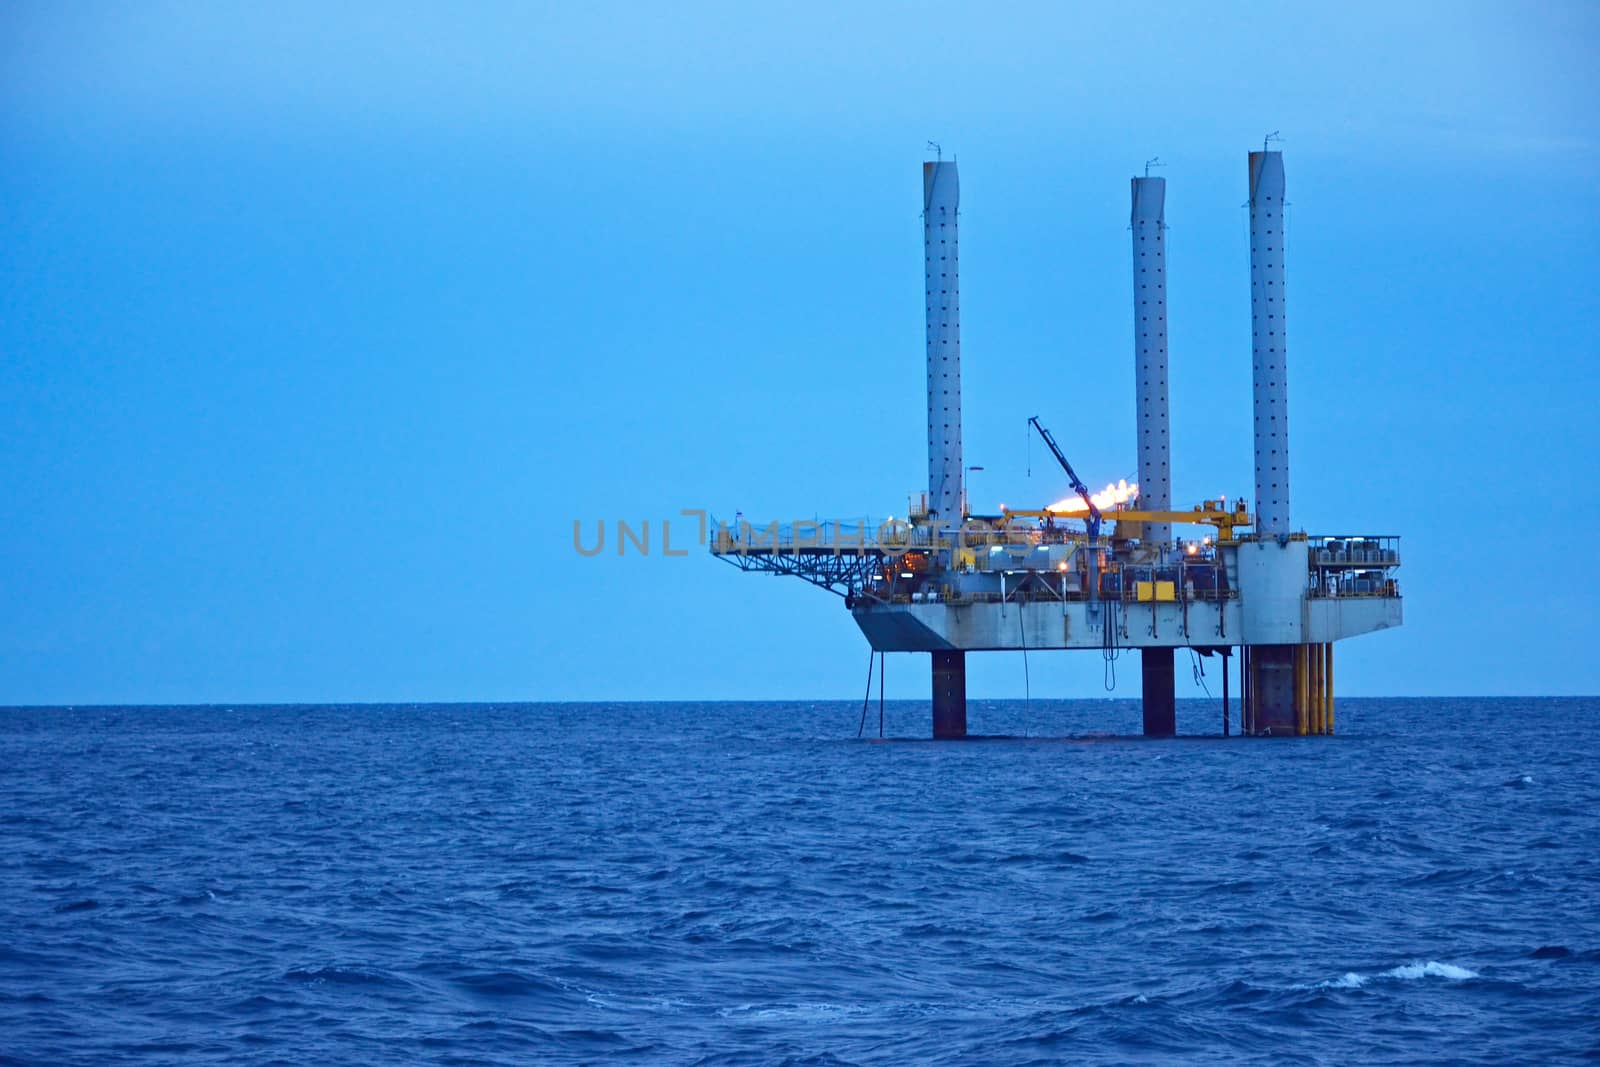 The offshore oil rig in early morning, Gulf of Thailand. by think4photop